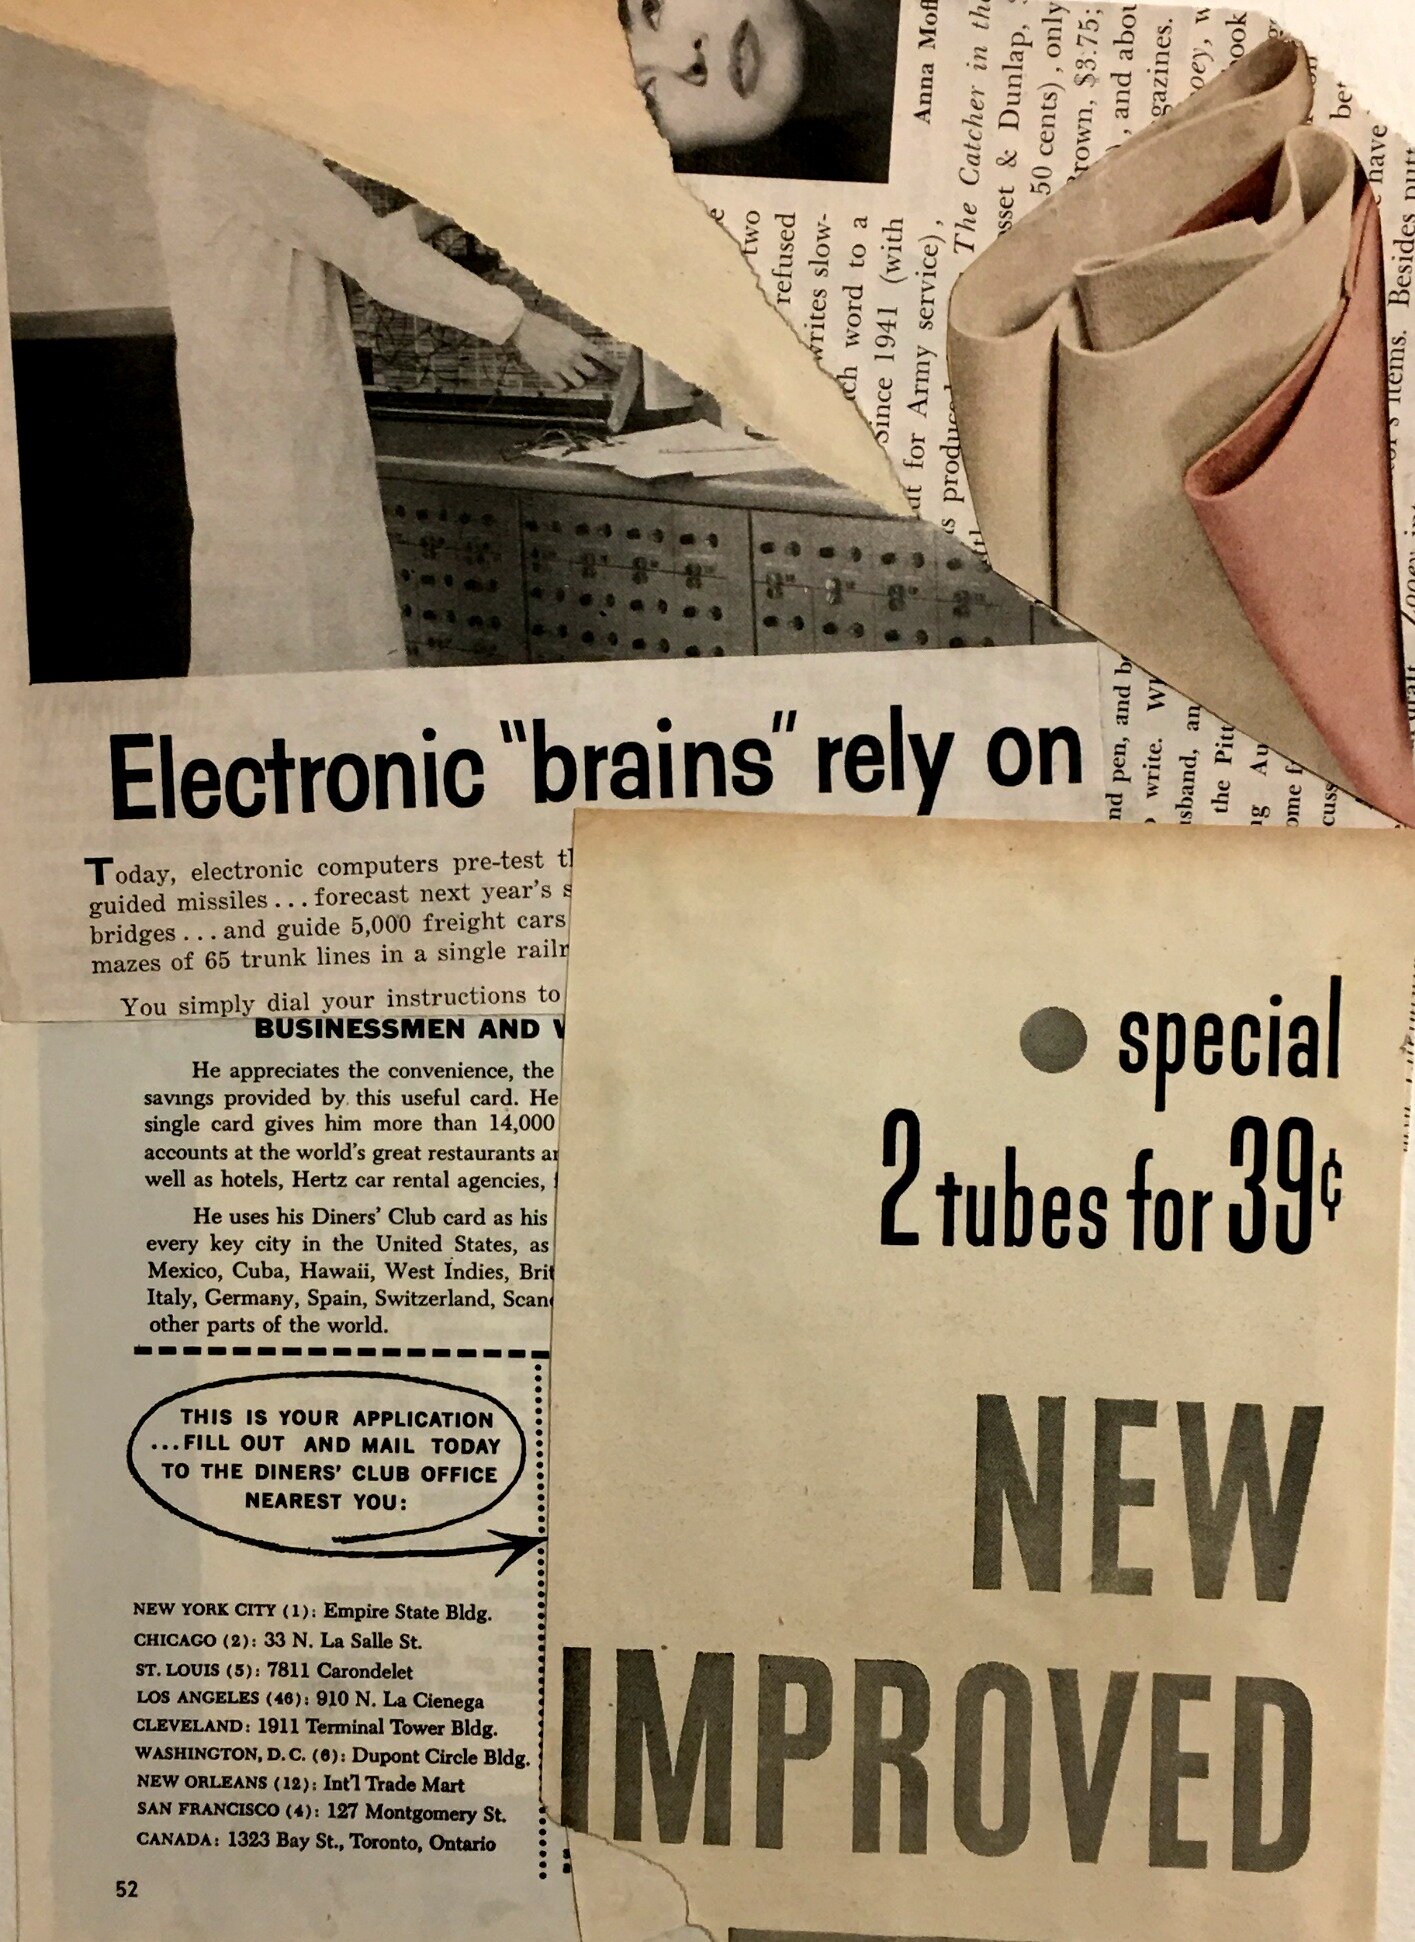 New and Improved Electronic Brains